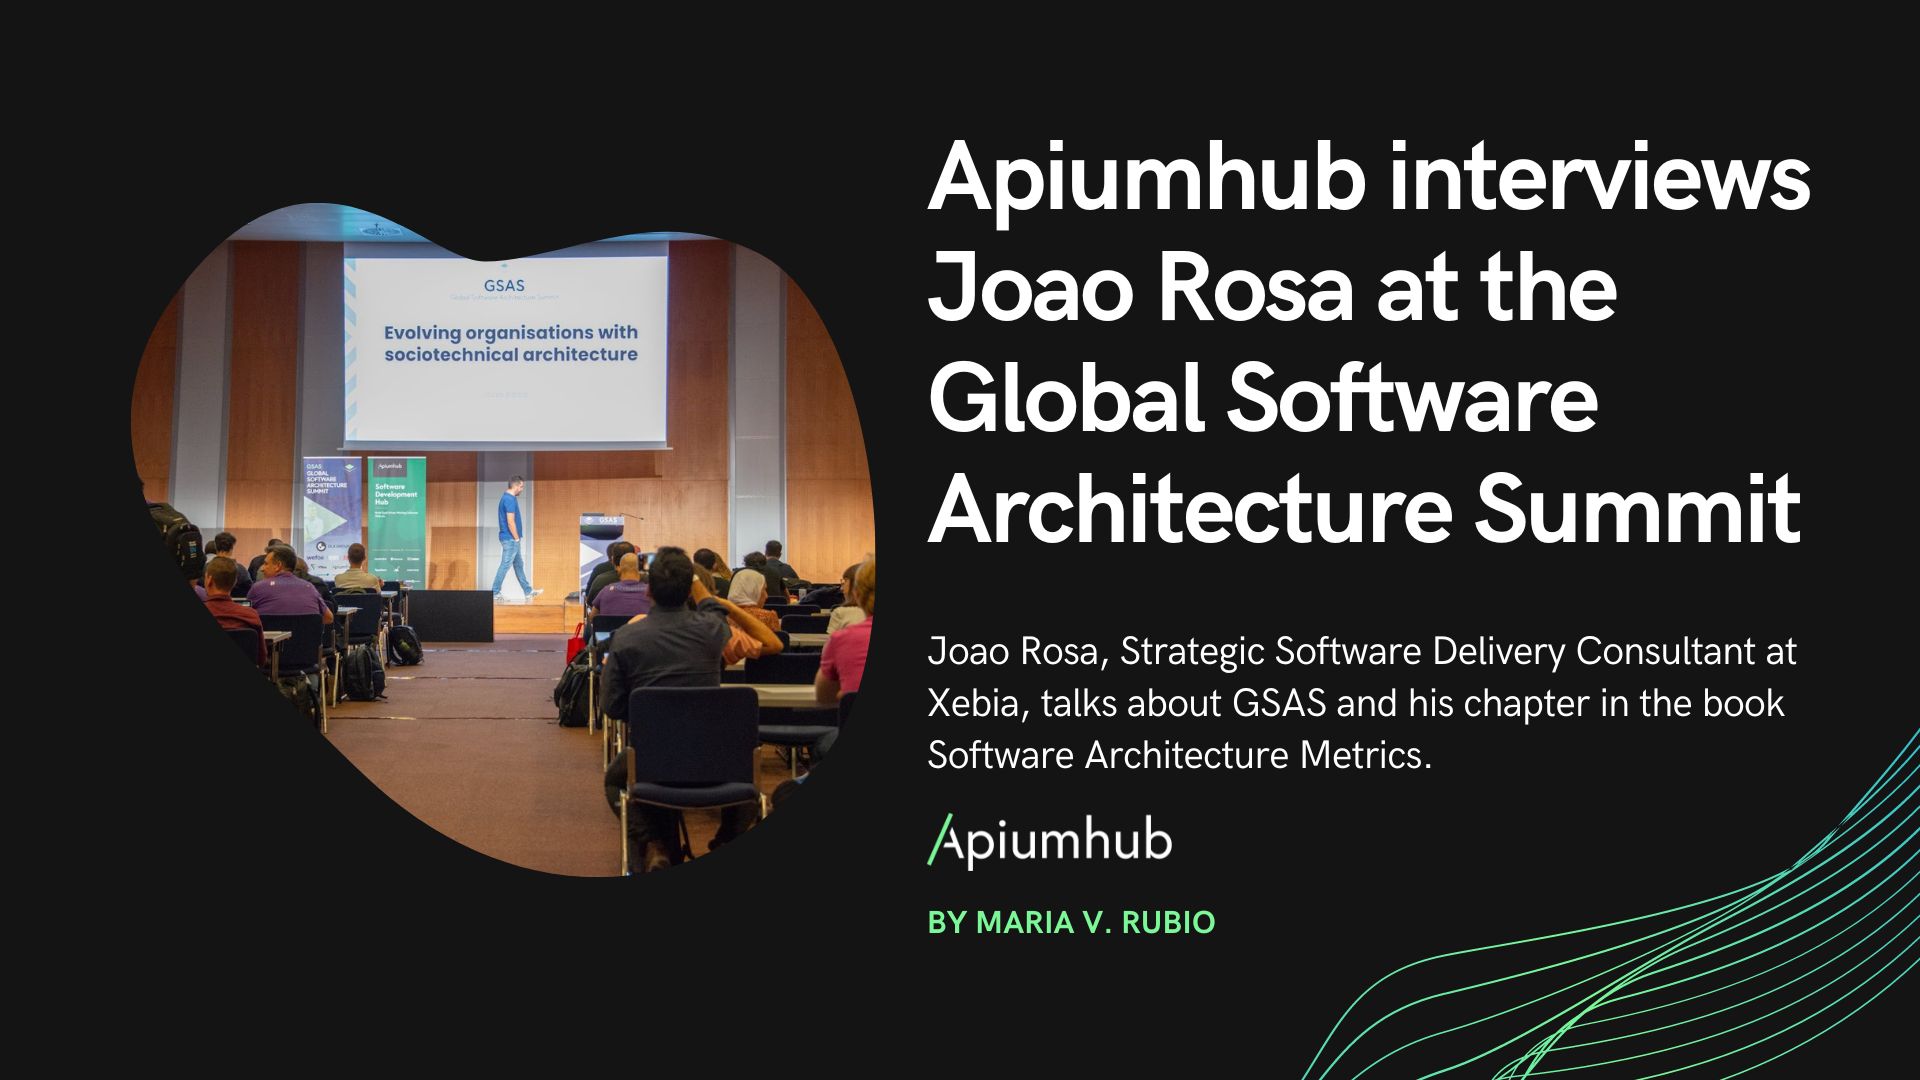 Apiumhub interviews Joao Rosa at the Global Software Architecture Summit